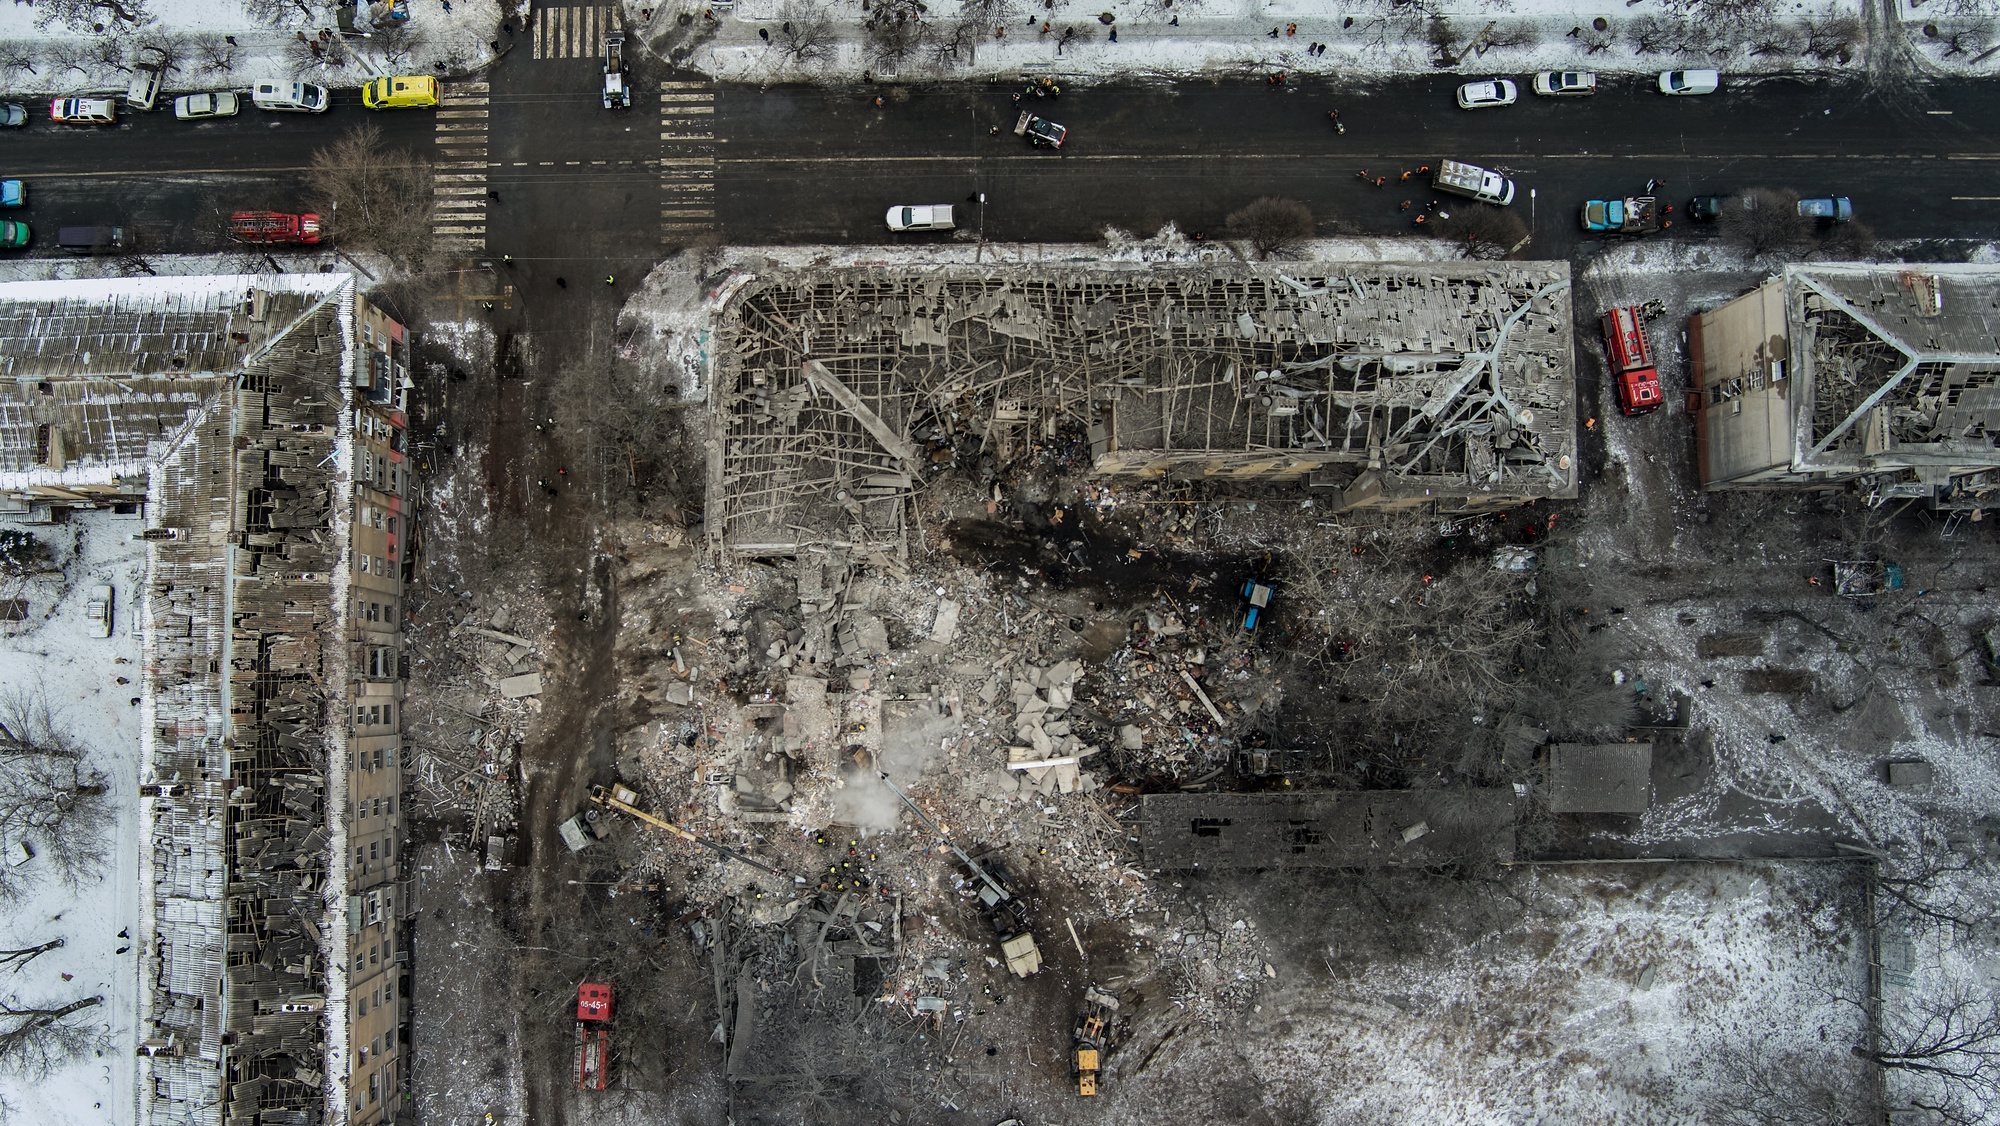 epa10481437 (FILE) - An aerial view taken with a drone of damage at site of an overnight missile strike on a residential district in Kramatorsk, Donetsk region, eastern Ukraine, 02 February 2023. (Issued 21 February 2023). Russian troops on 24 February 2022, entered Ukrainian territory, starting a conflict that has provoked destruction and a humanitarian crisis. One year on, fighting continues in many parts of the country.  EPA/YEVGEN HONCHARENKO  ATTENTION: This Image is part of a PHOTO SET